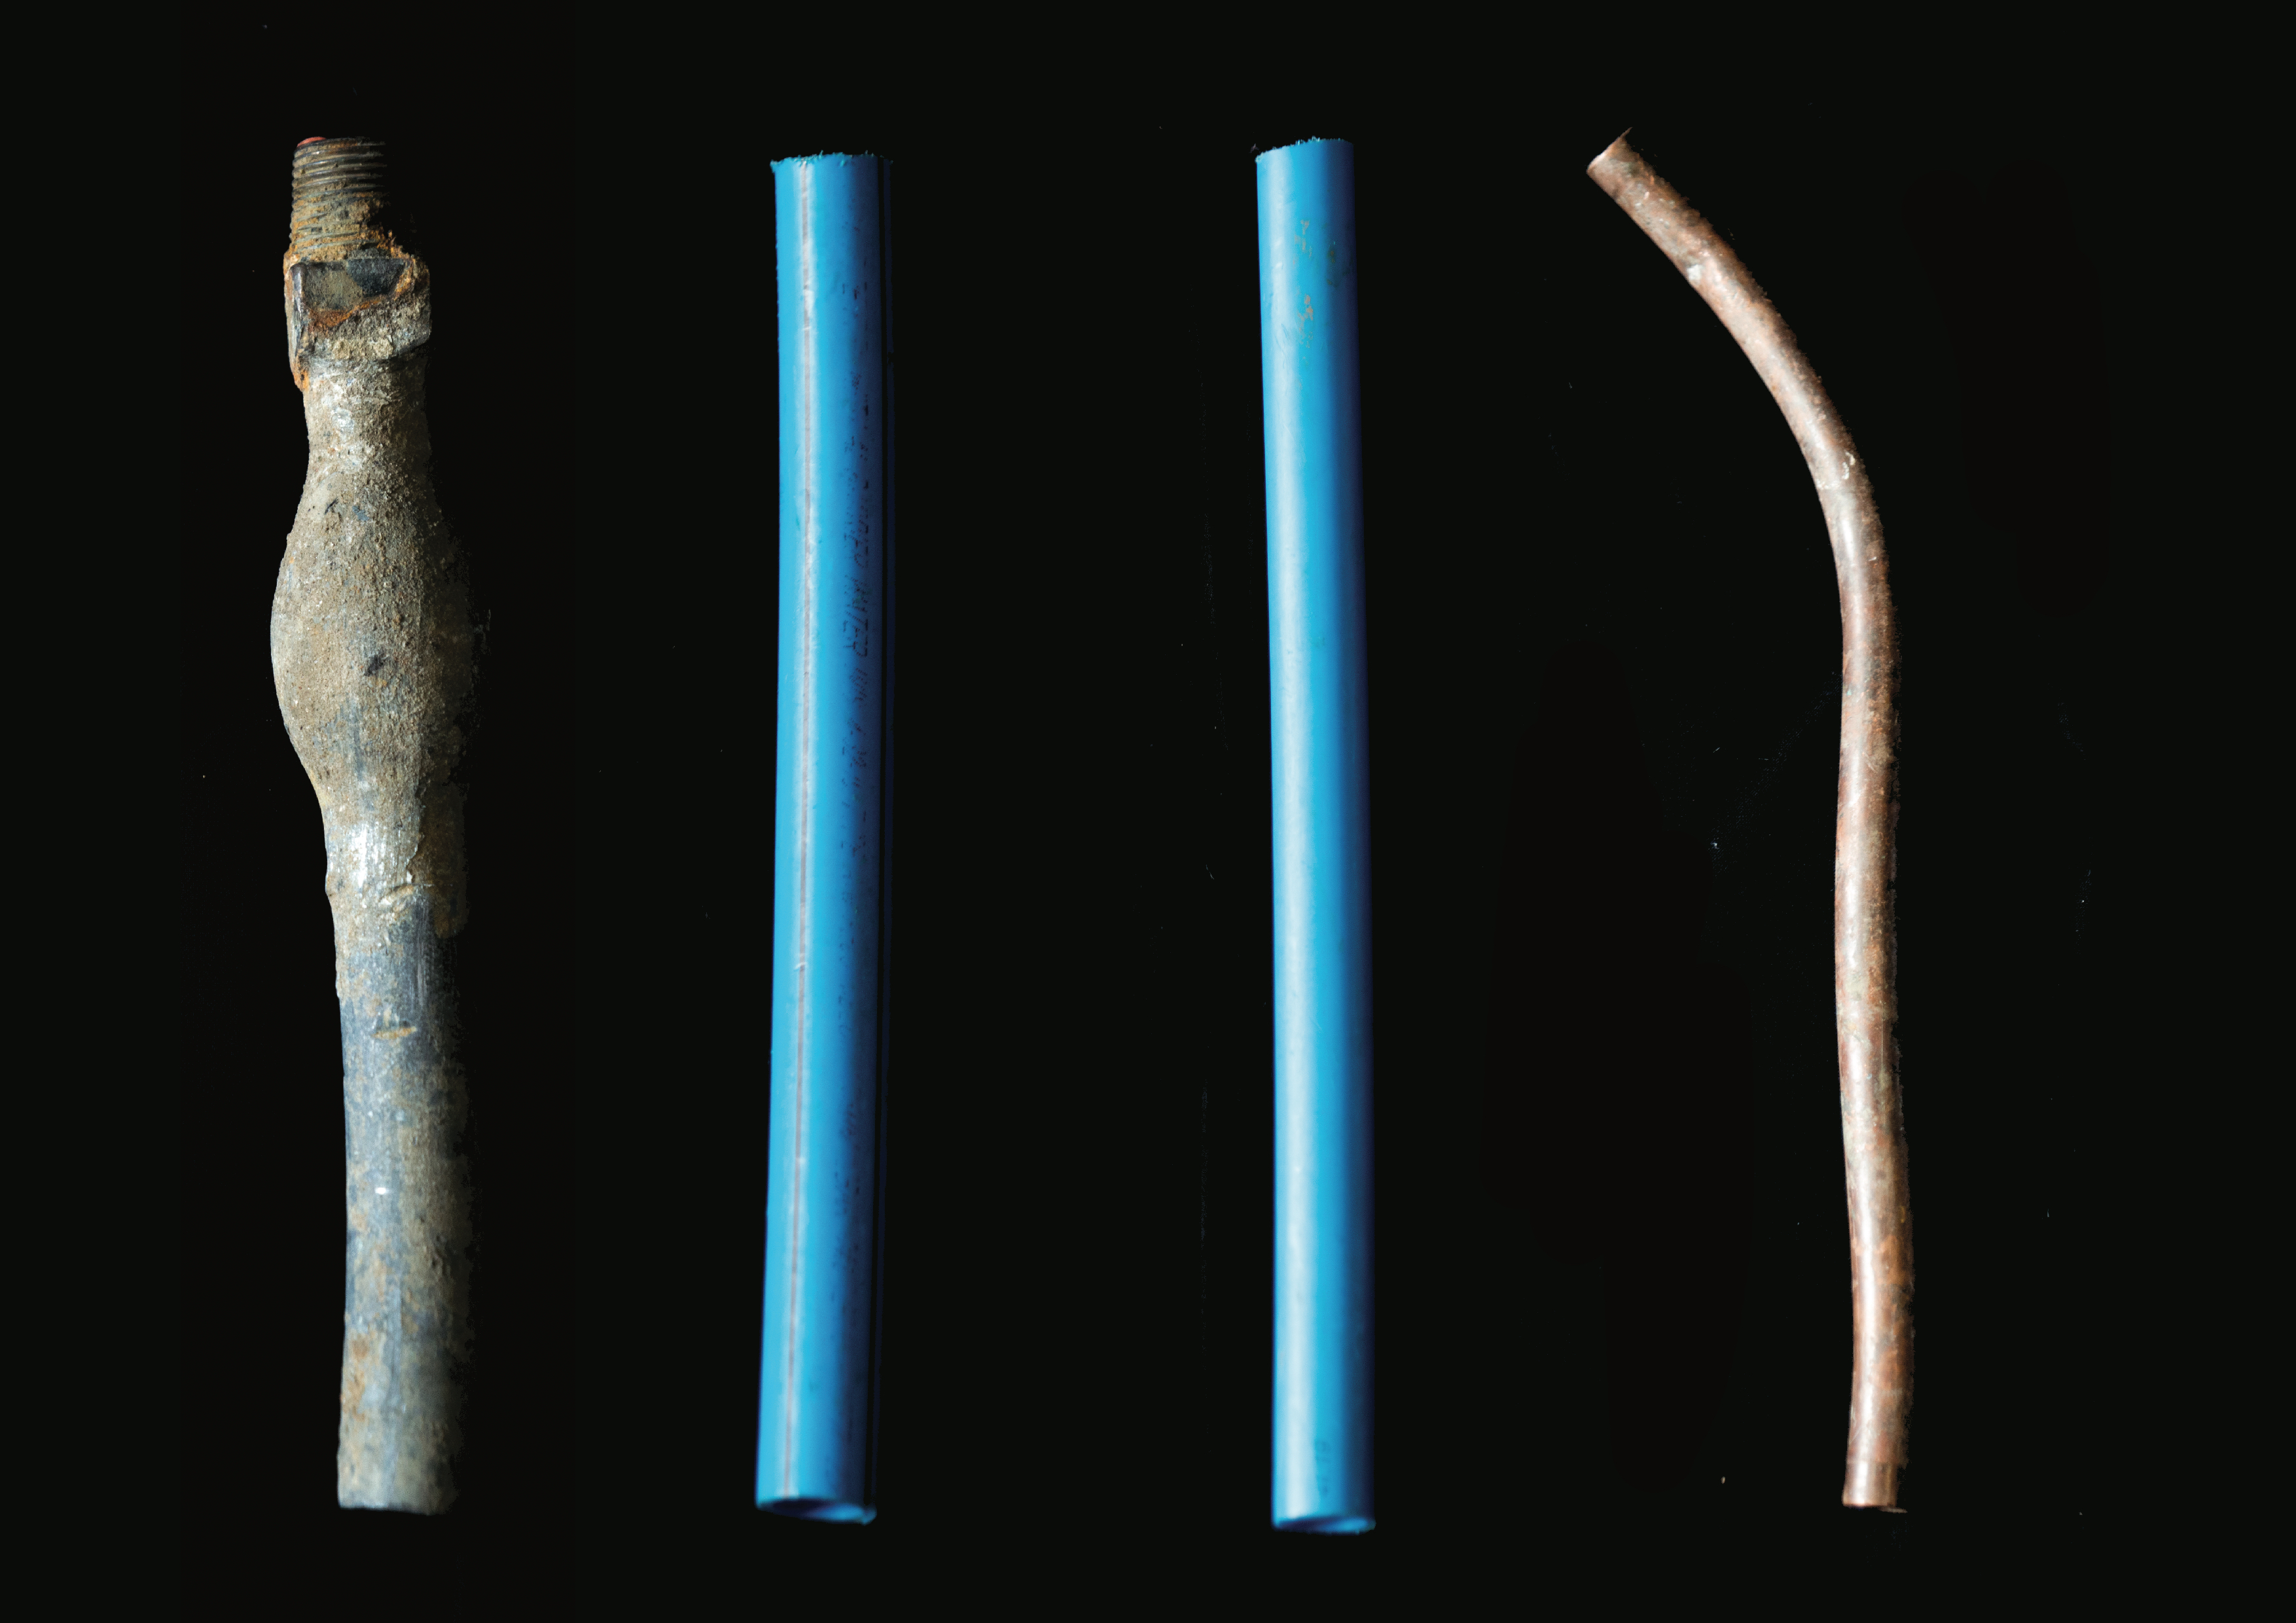 image of different coloured pipes